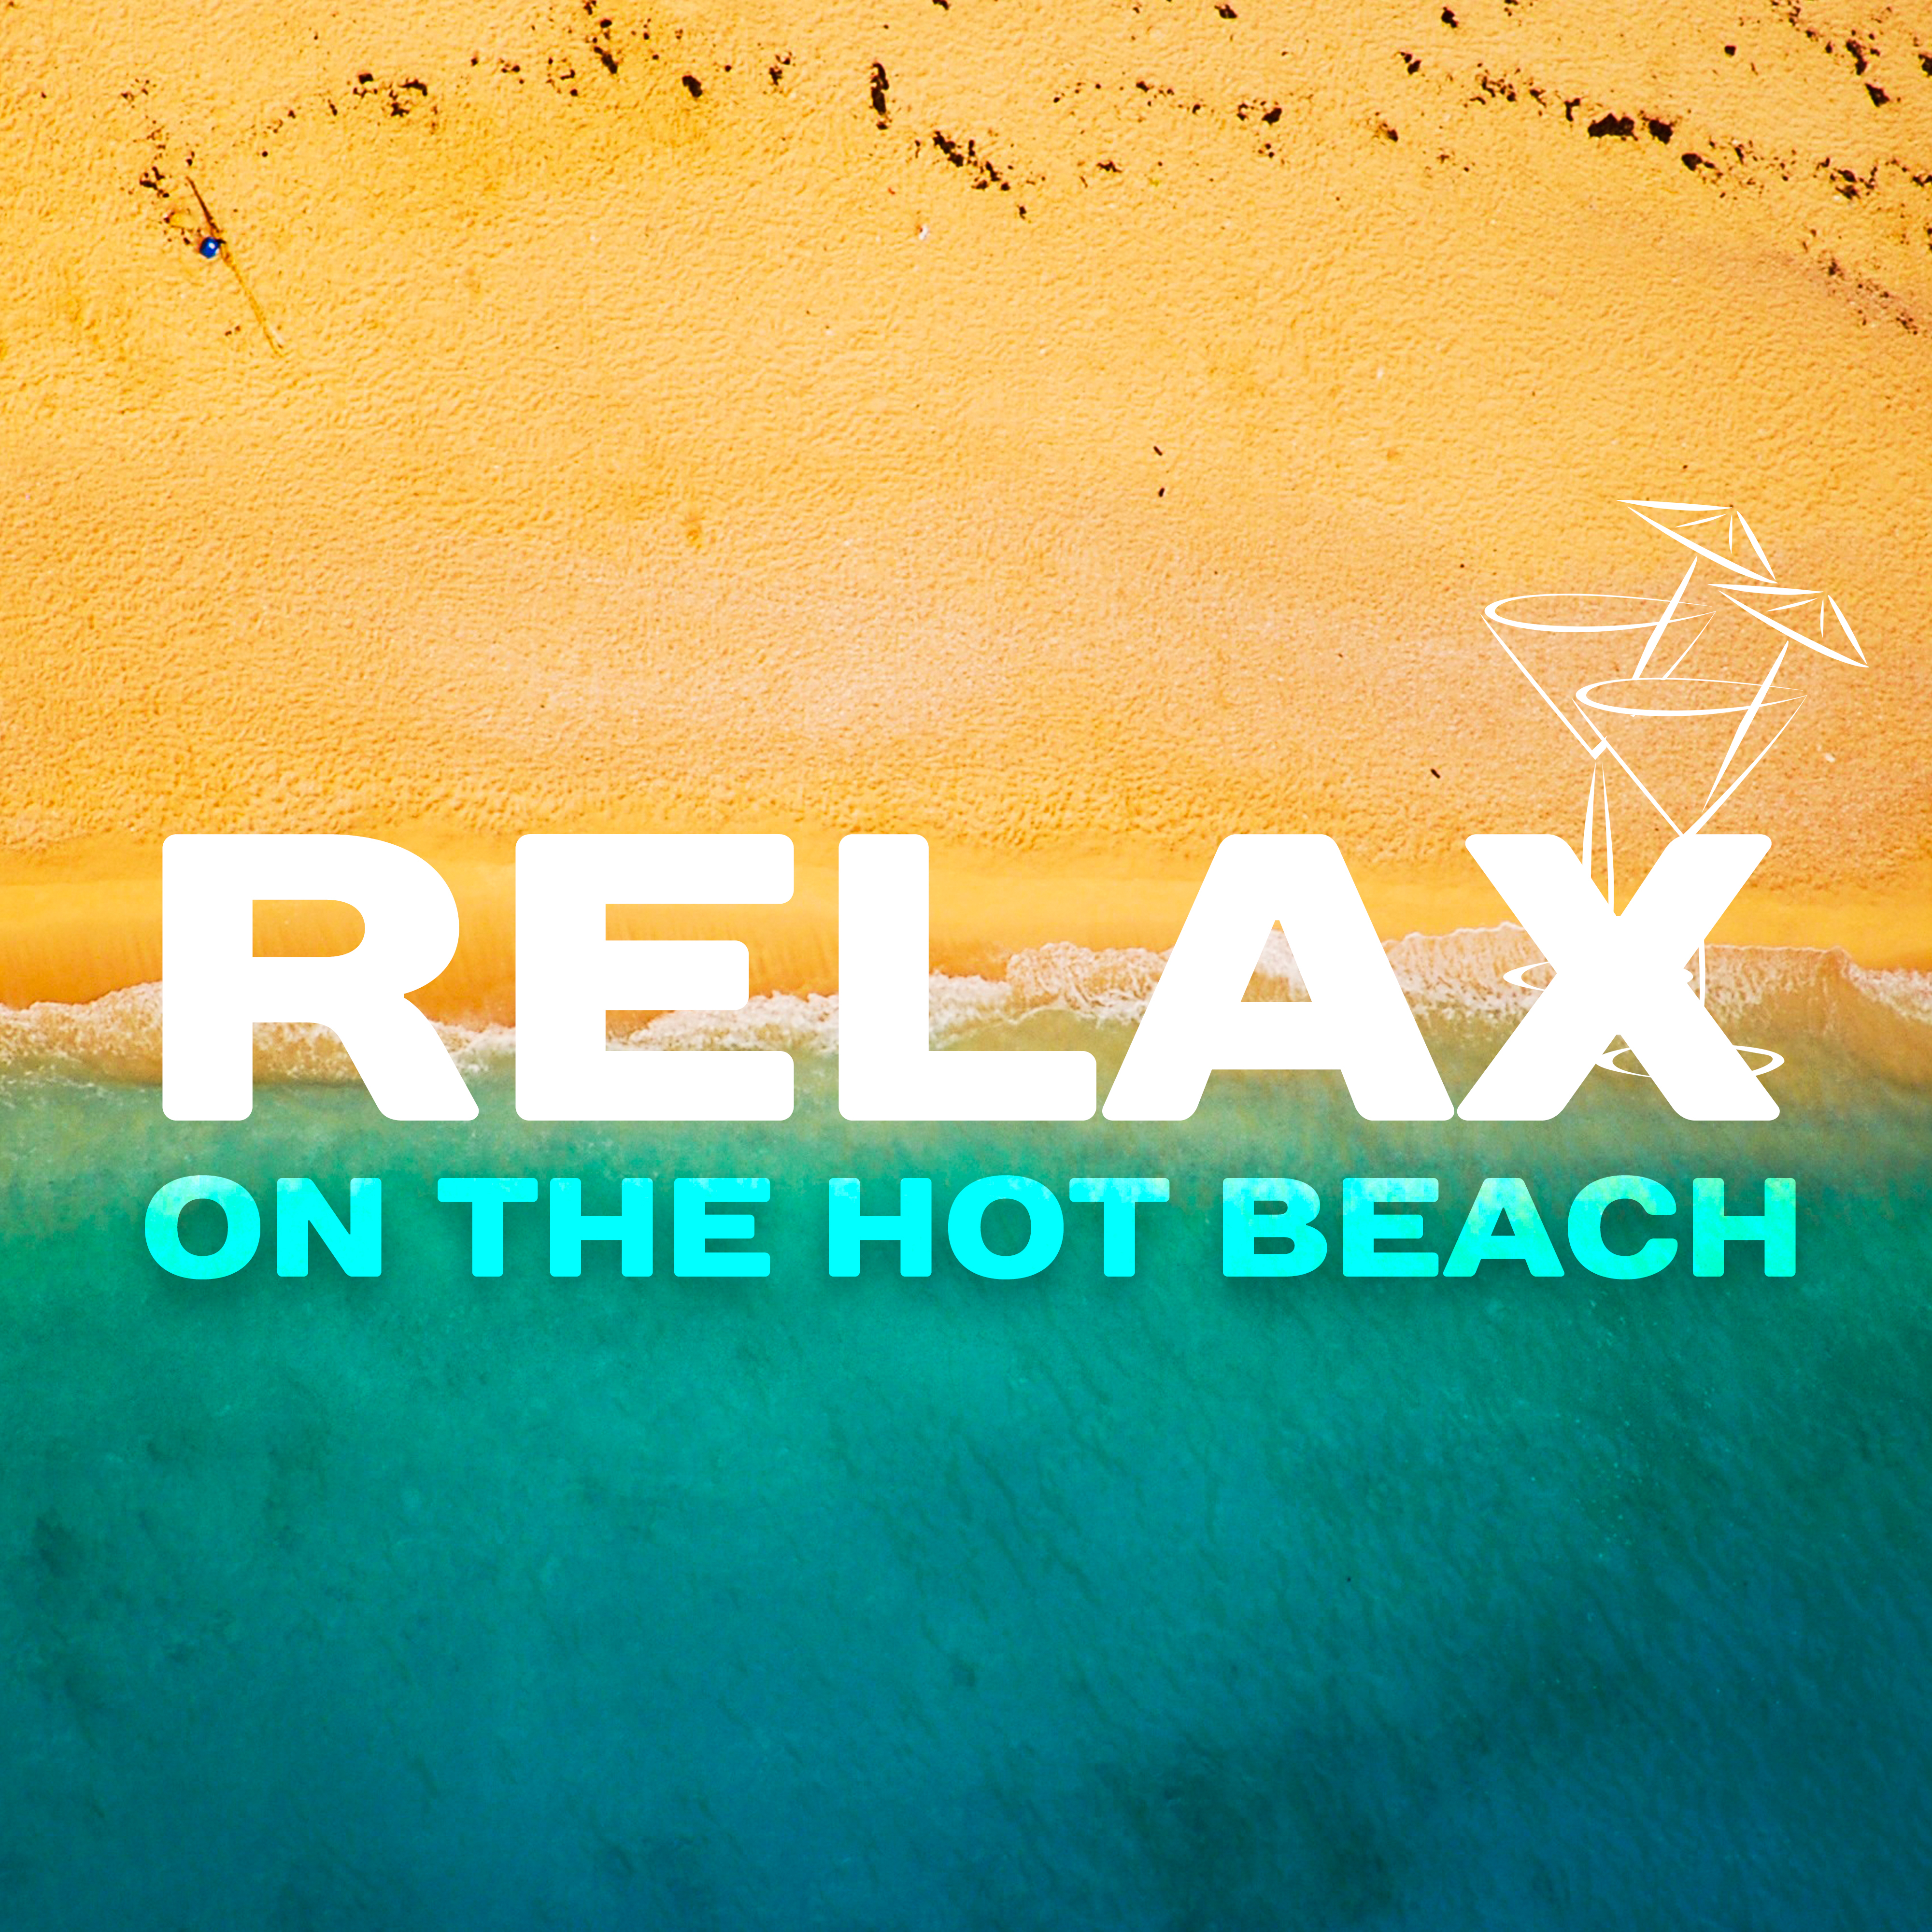 Relax on the Hot Beach – Pure Waves, Relaxation, Beach Chill, Colorful Drinks Under Palms, Summer Chill, Best Holiday